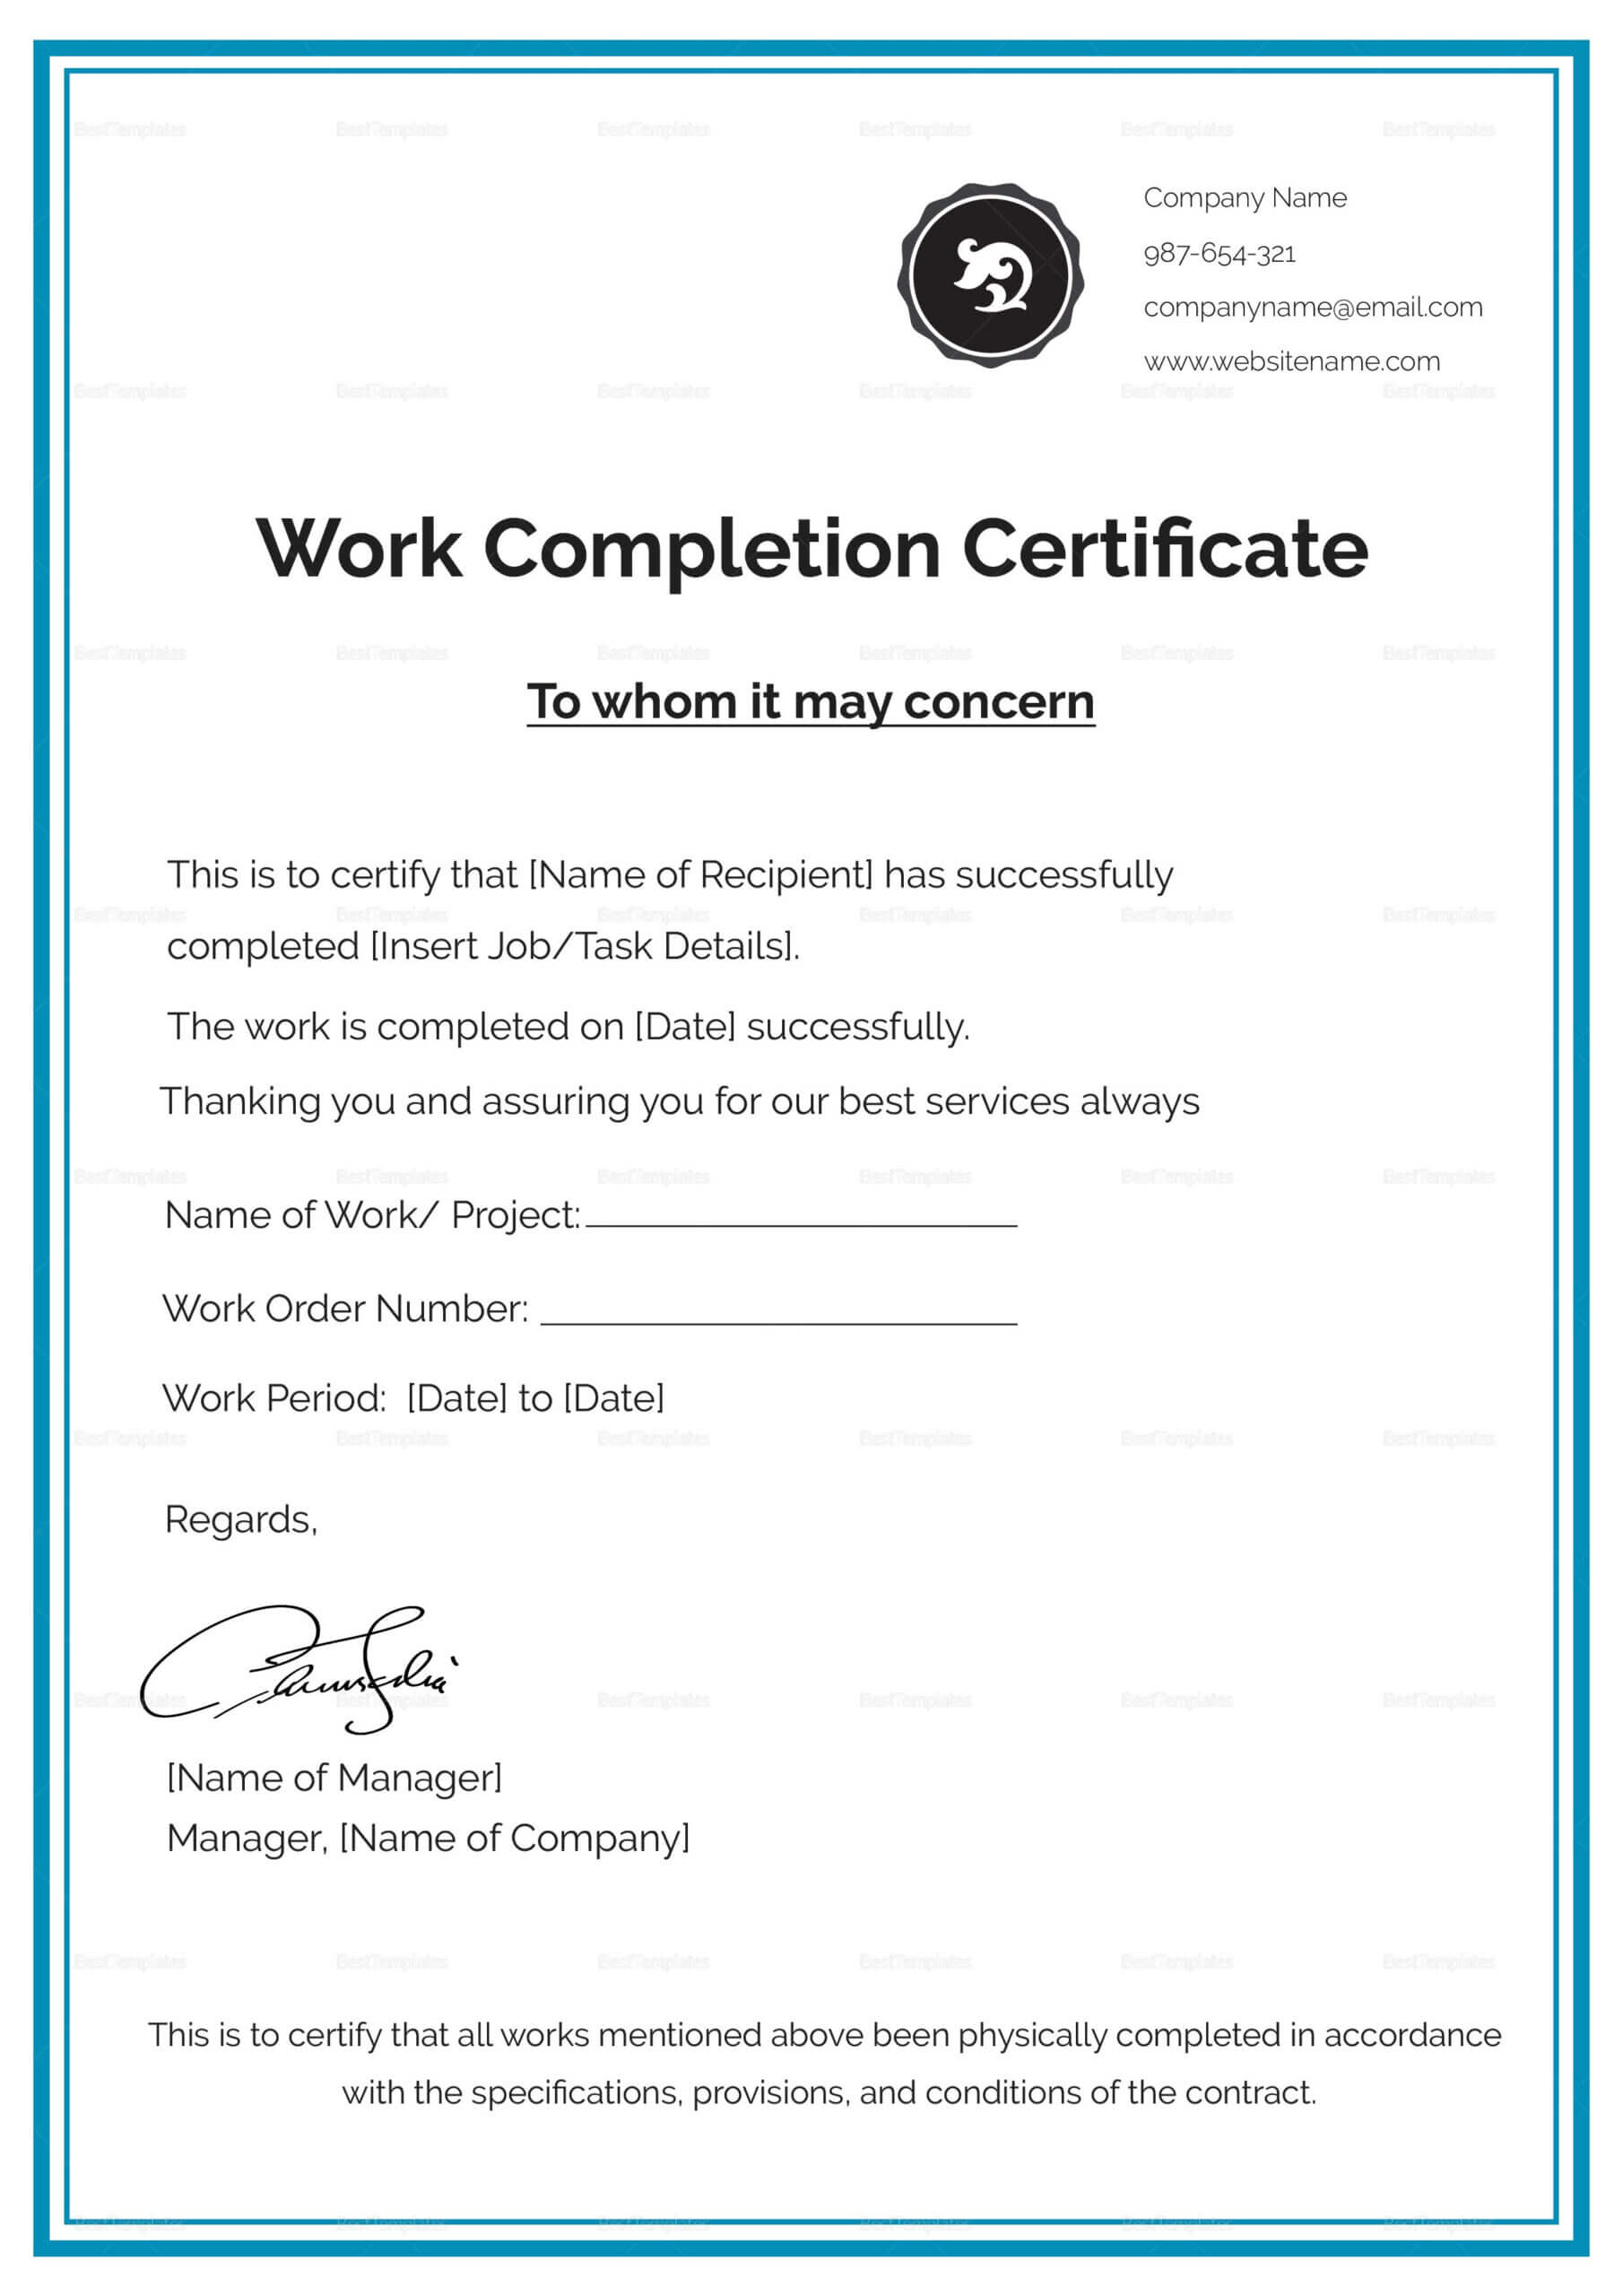 Work Completion Certificate Template In 2020 | Certificate In Construction Certificate Of Completion Template